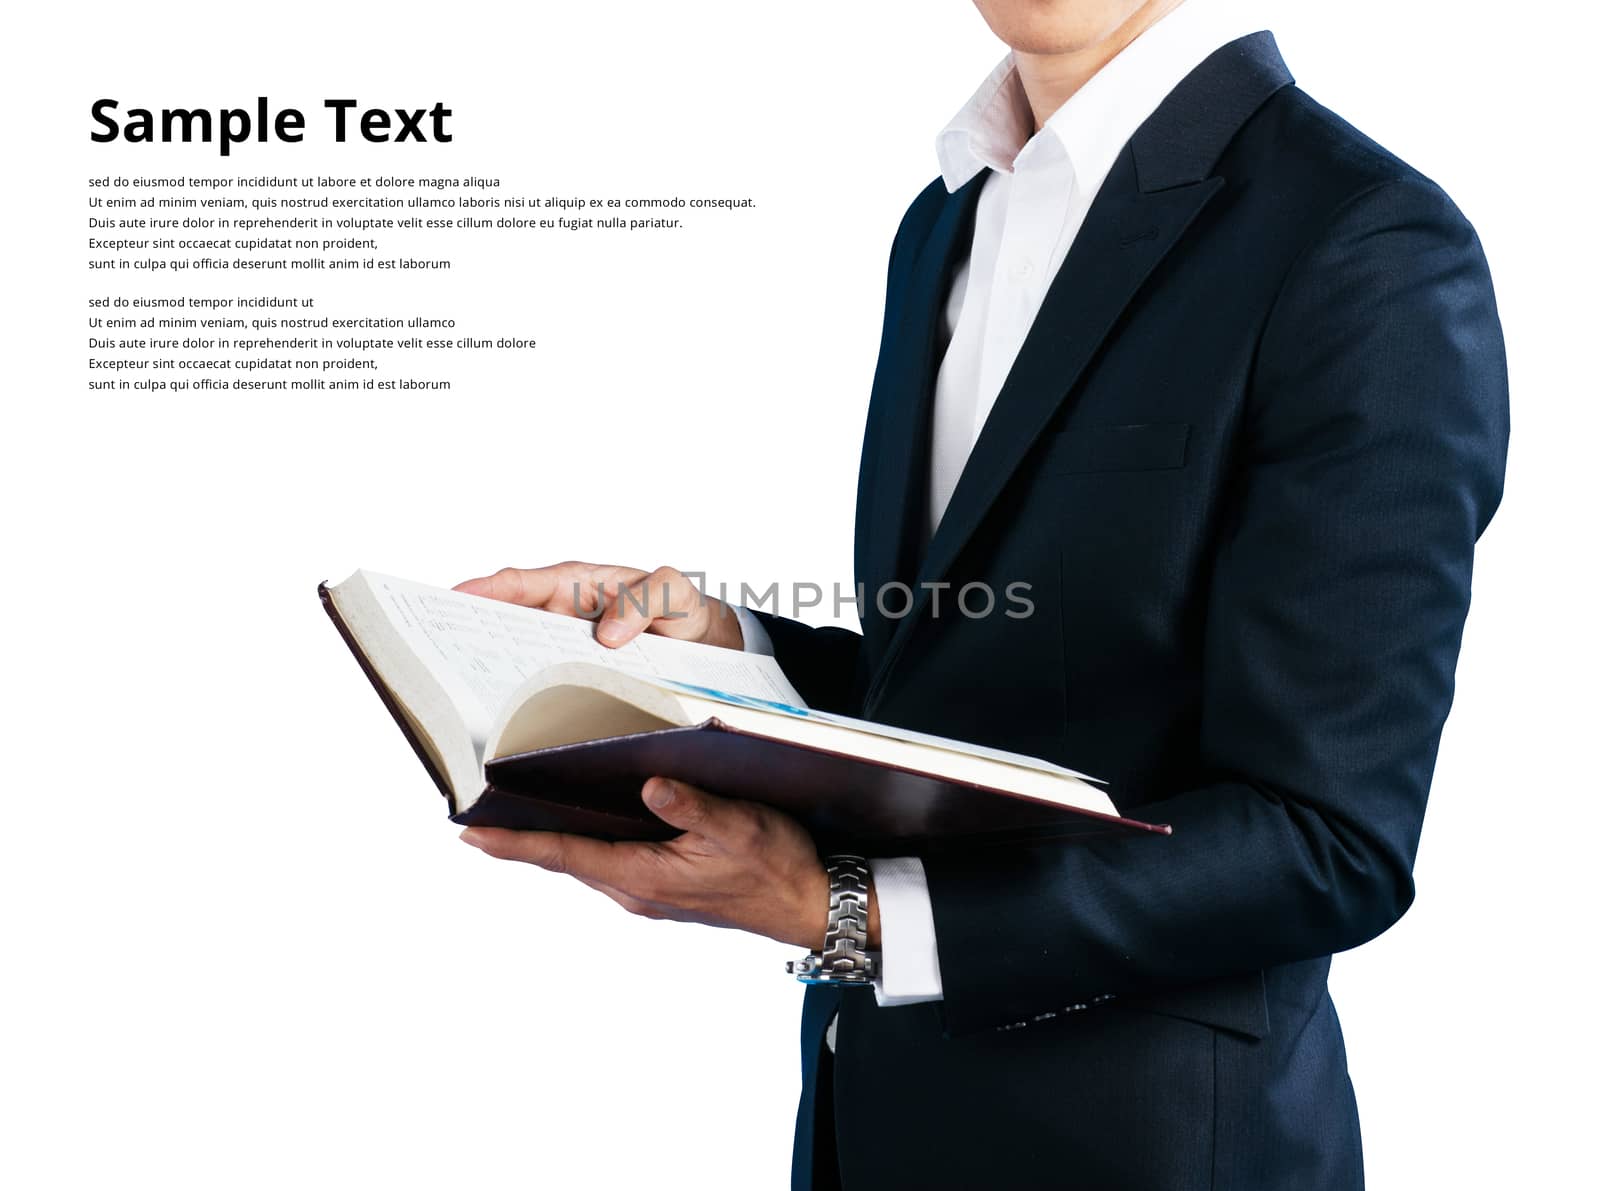 Businessman wearing in a suit wearing suit, holding book isolated on white background sample text clipping path